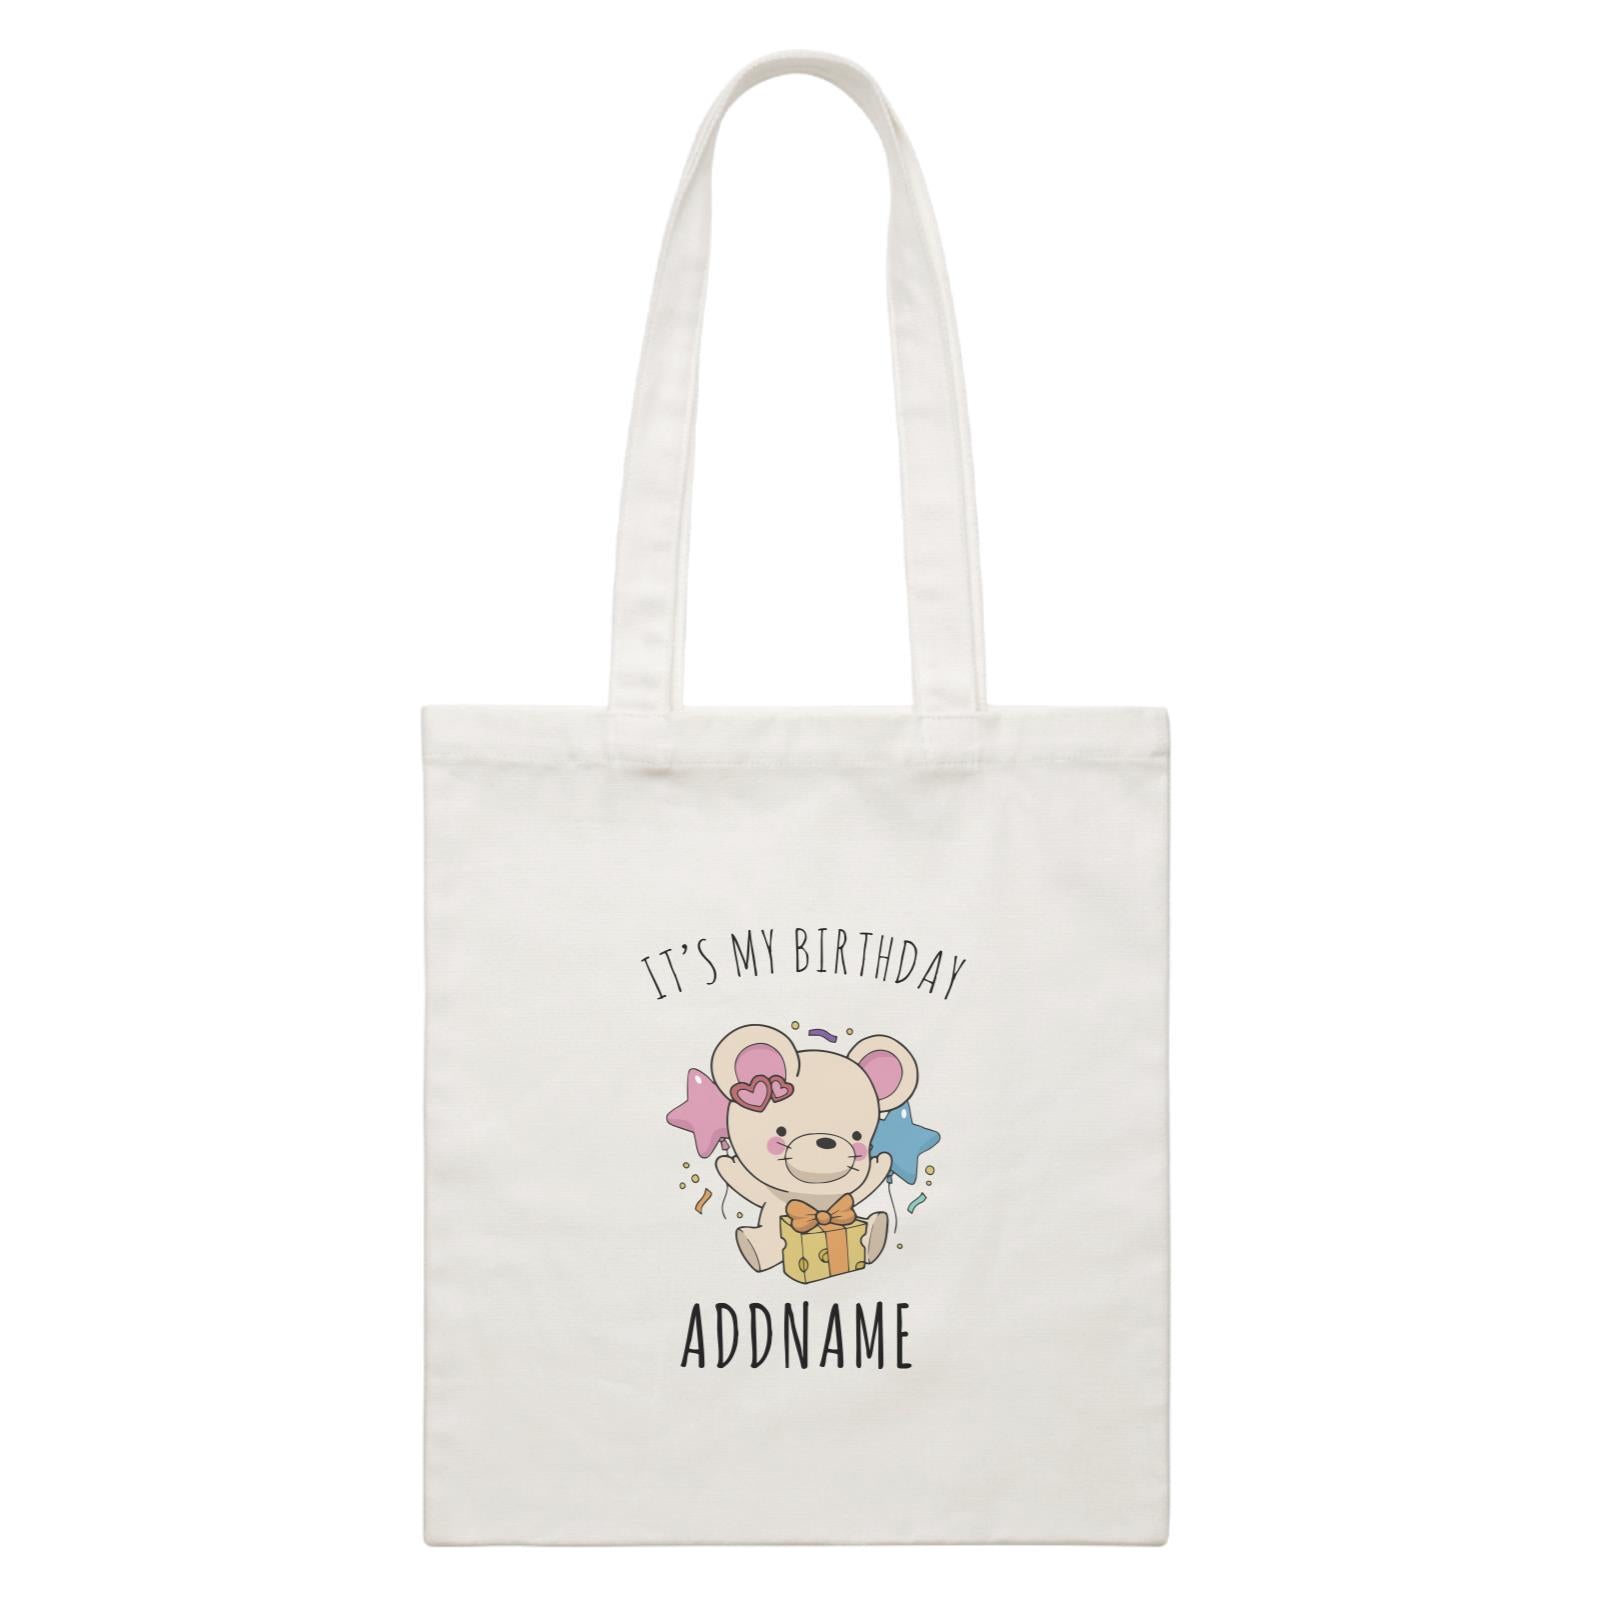 Birthday Sketch Animals Mouse with Cheese Present It's My Birthday Addname White Canvas Bag